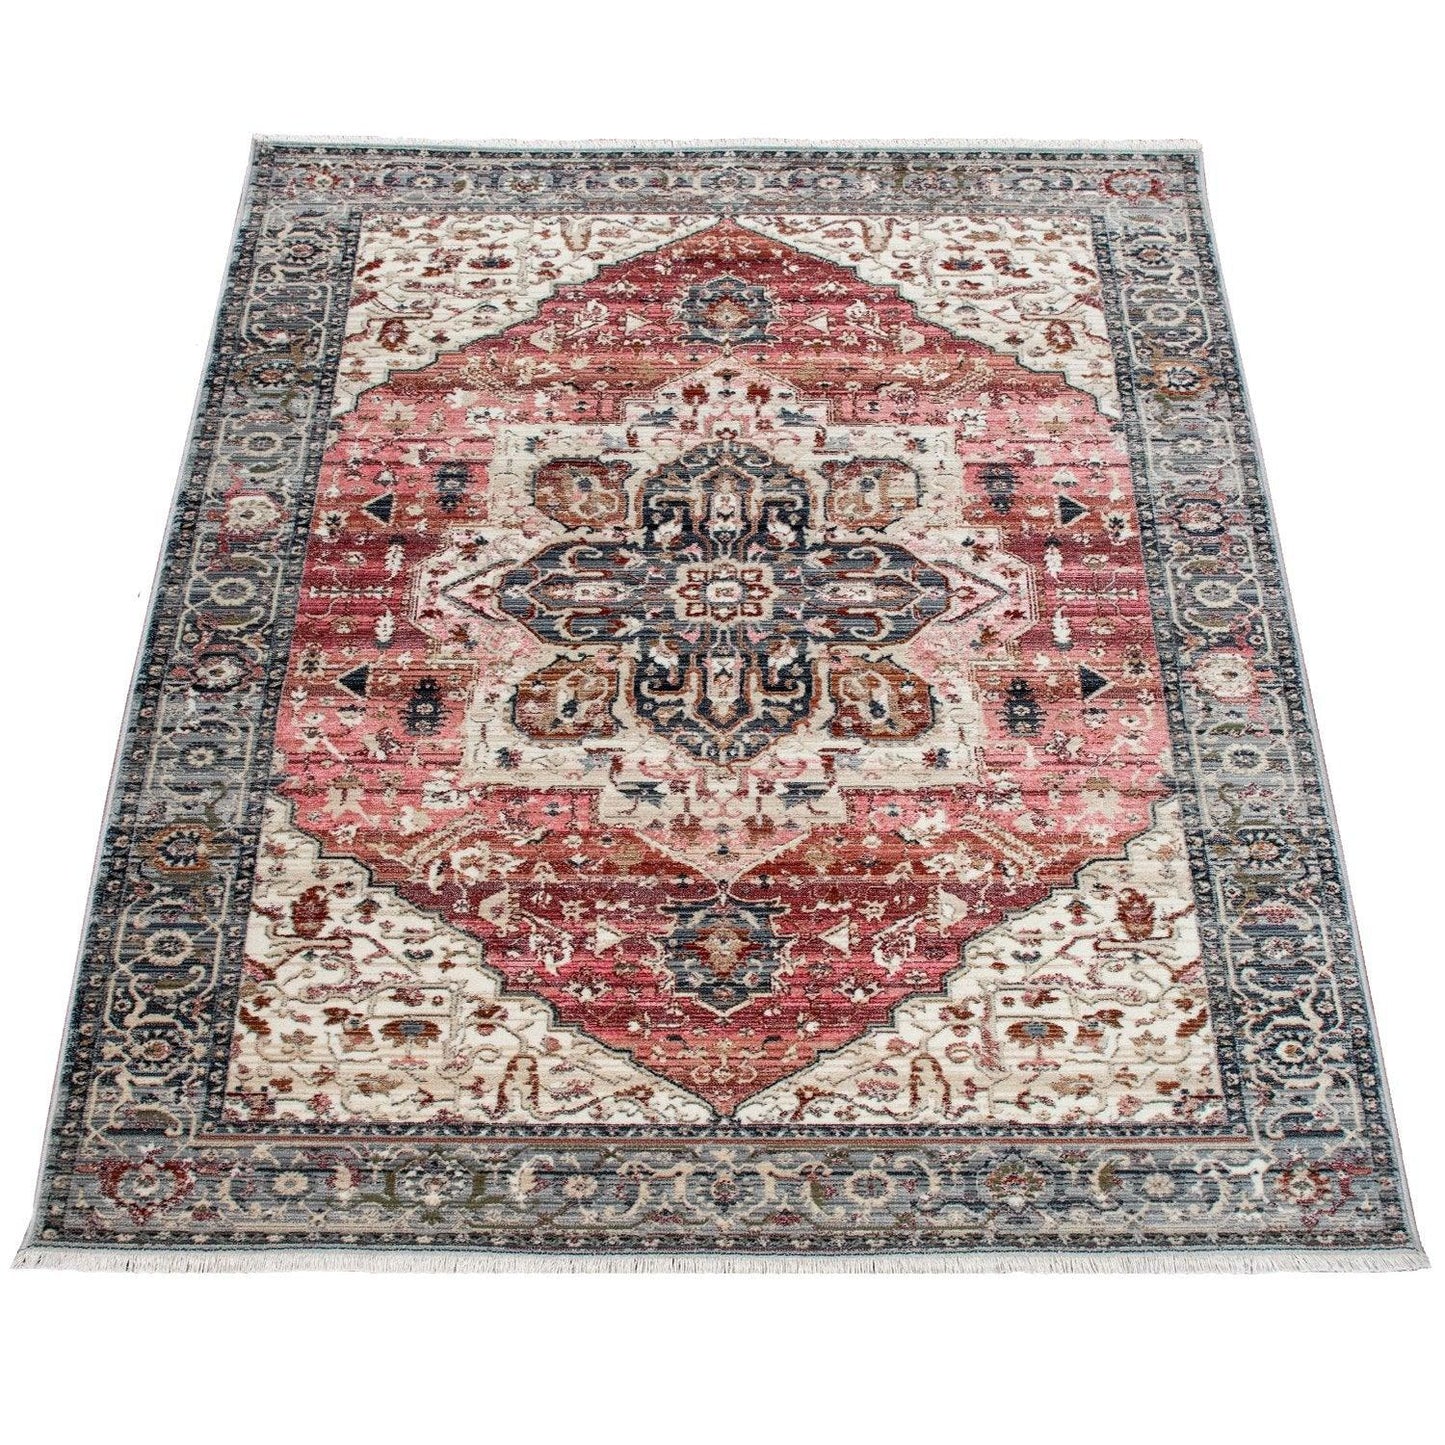 Rug, Short-Pile For Living Rooms, With Oriental Design And Border In Pink, Colourful - RugYourHome